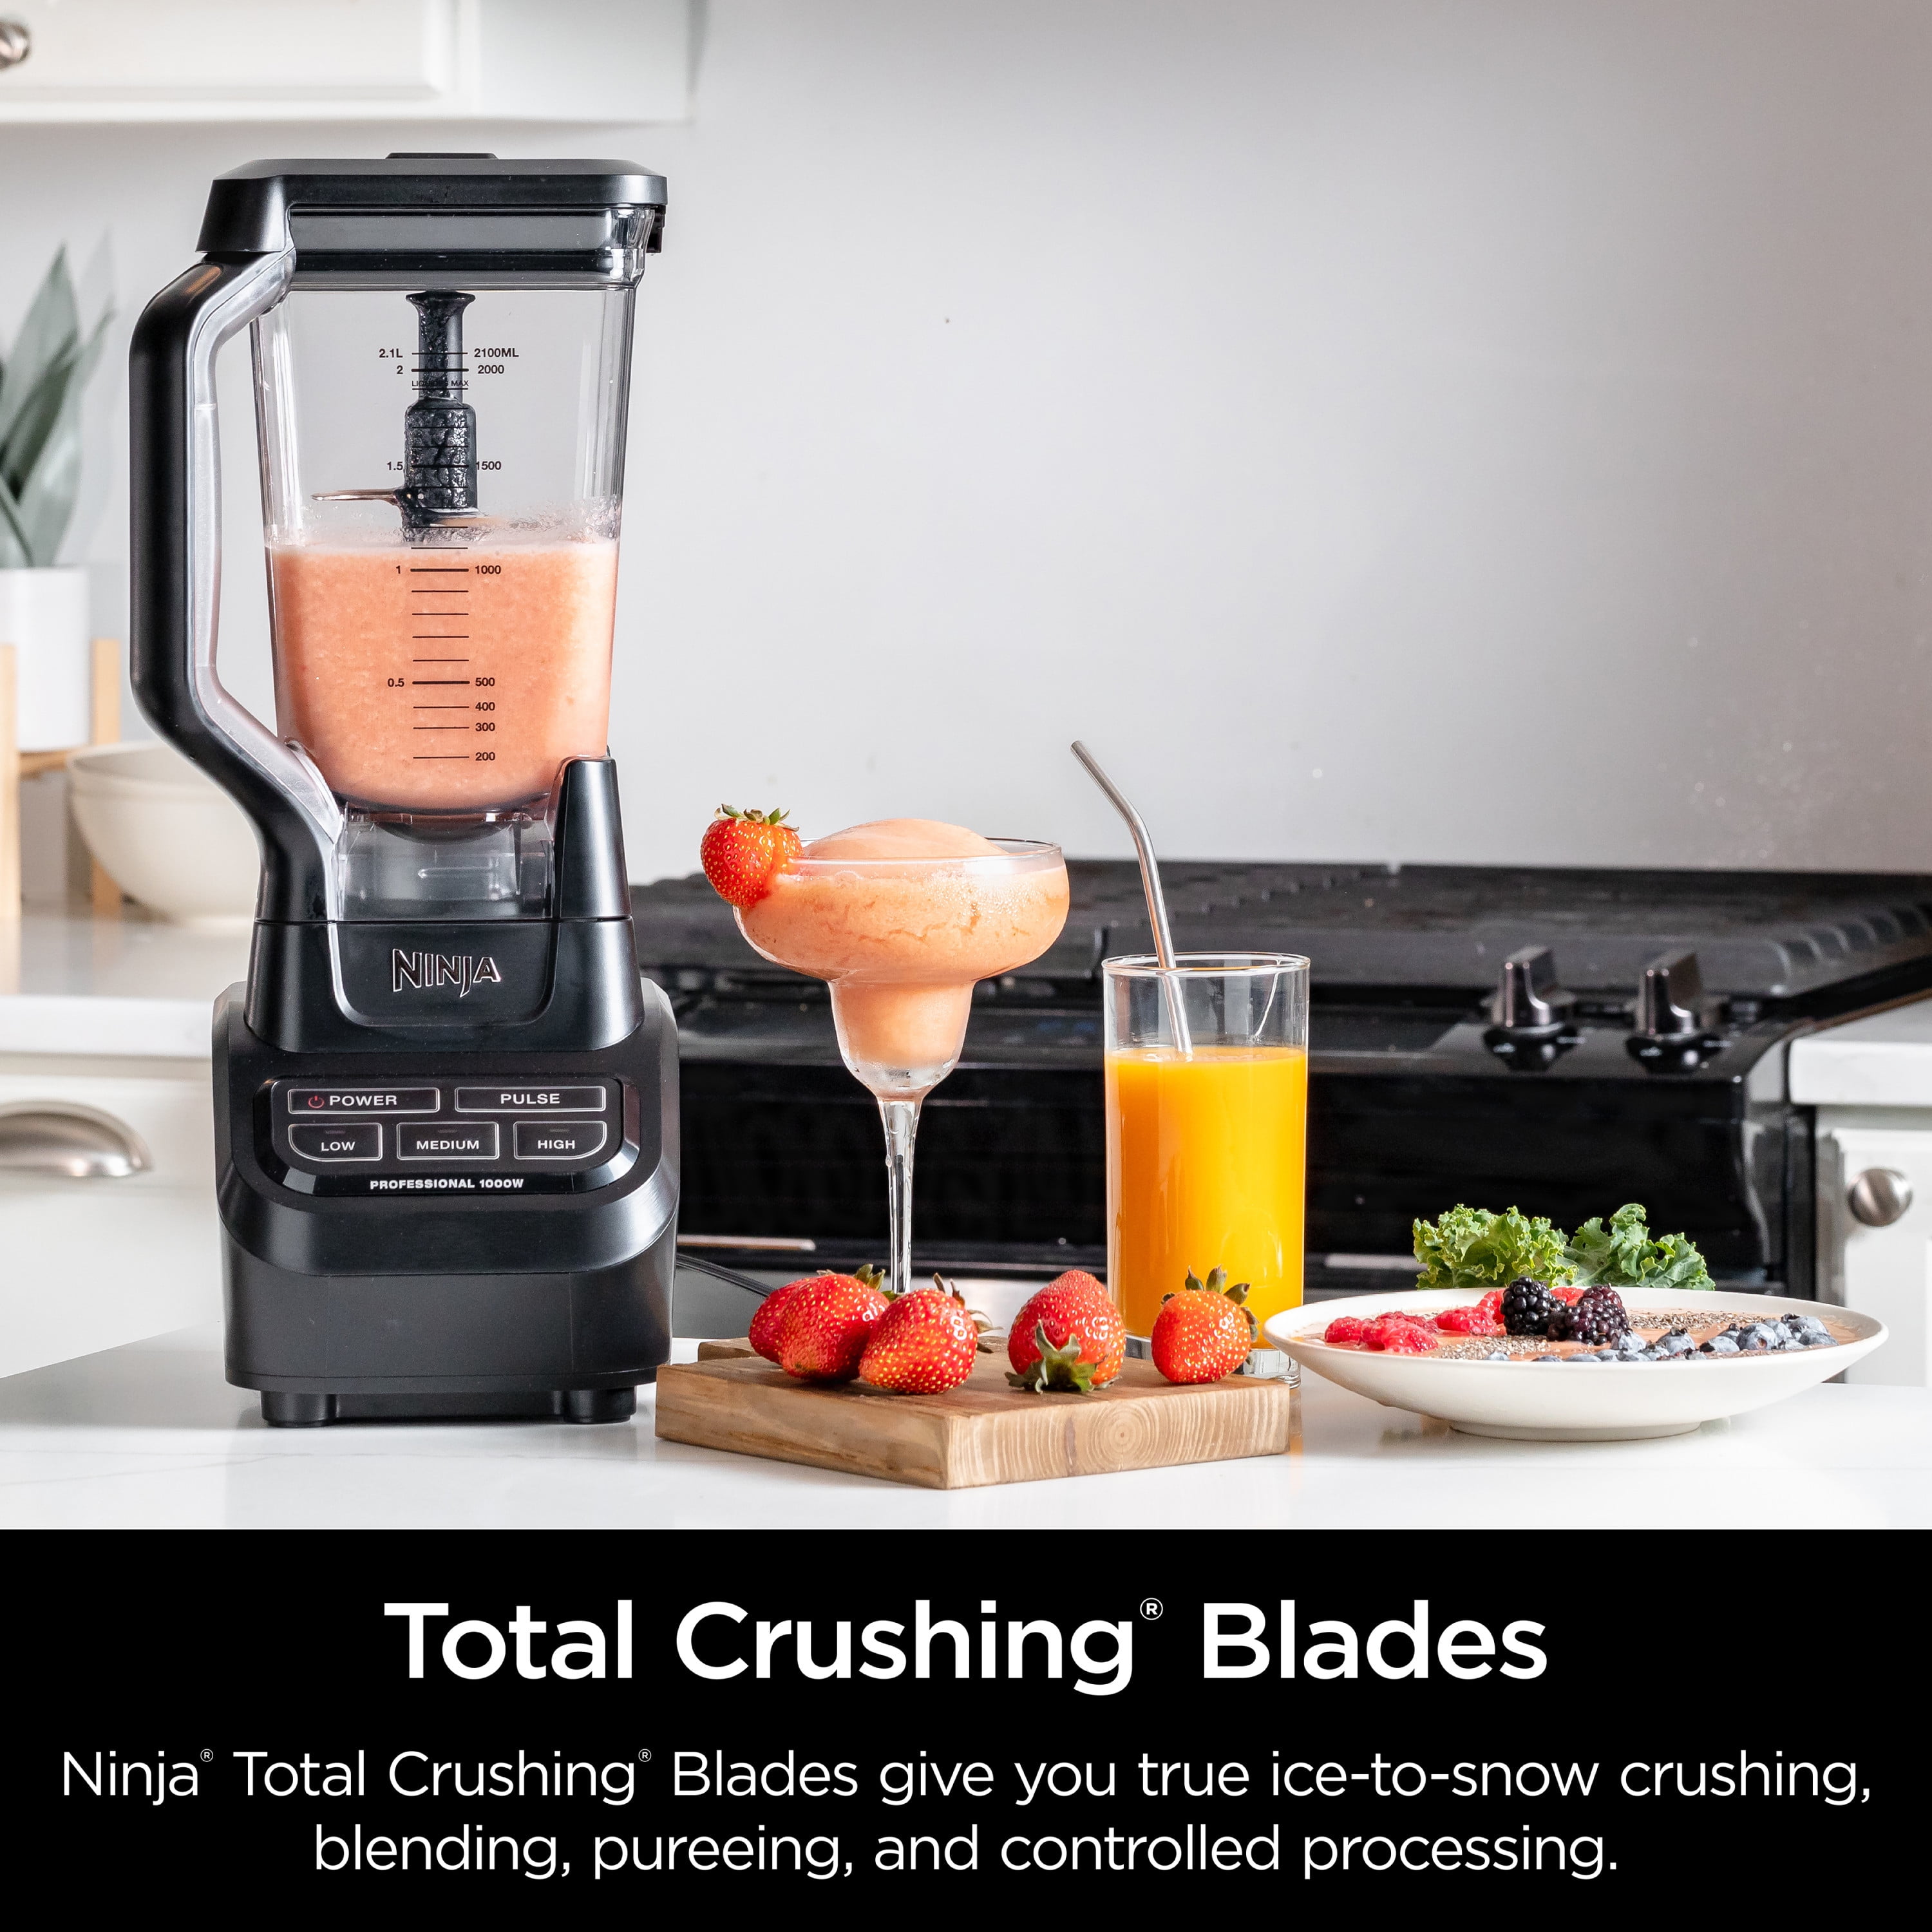 Ninja Blender 1000W 700ml with 500ml Cup - BN495ME - New Launch